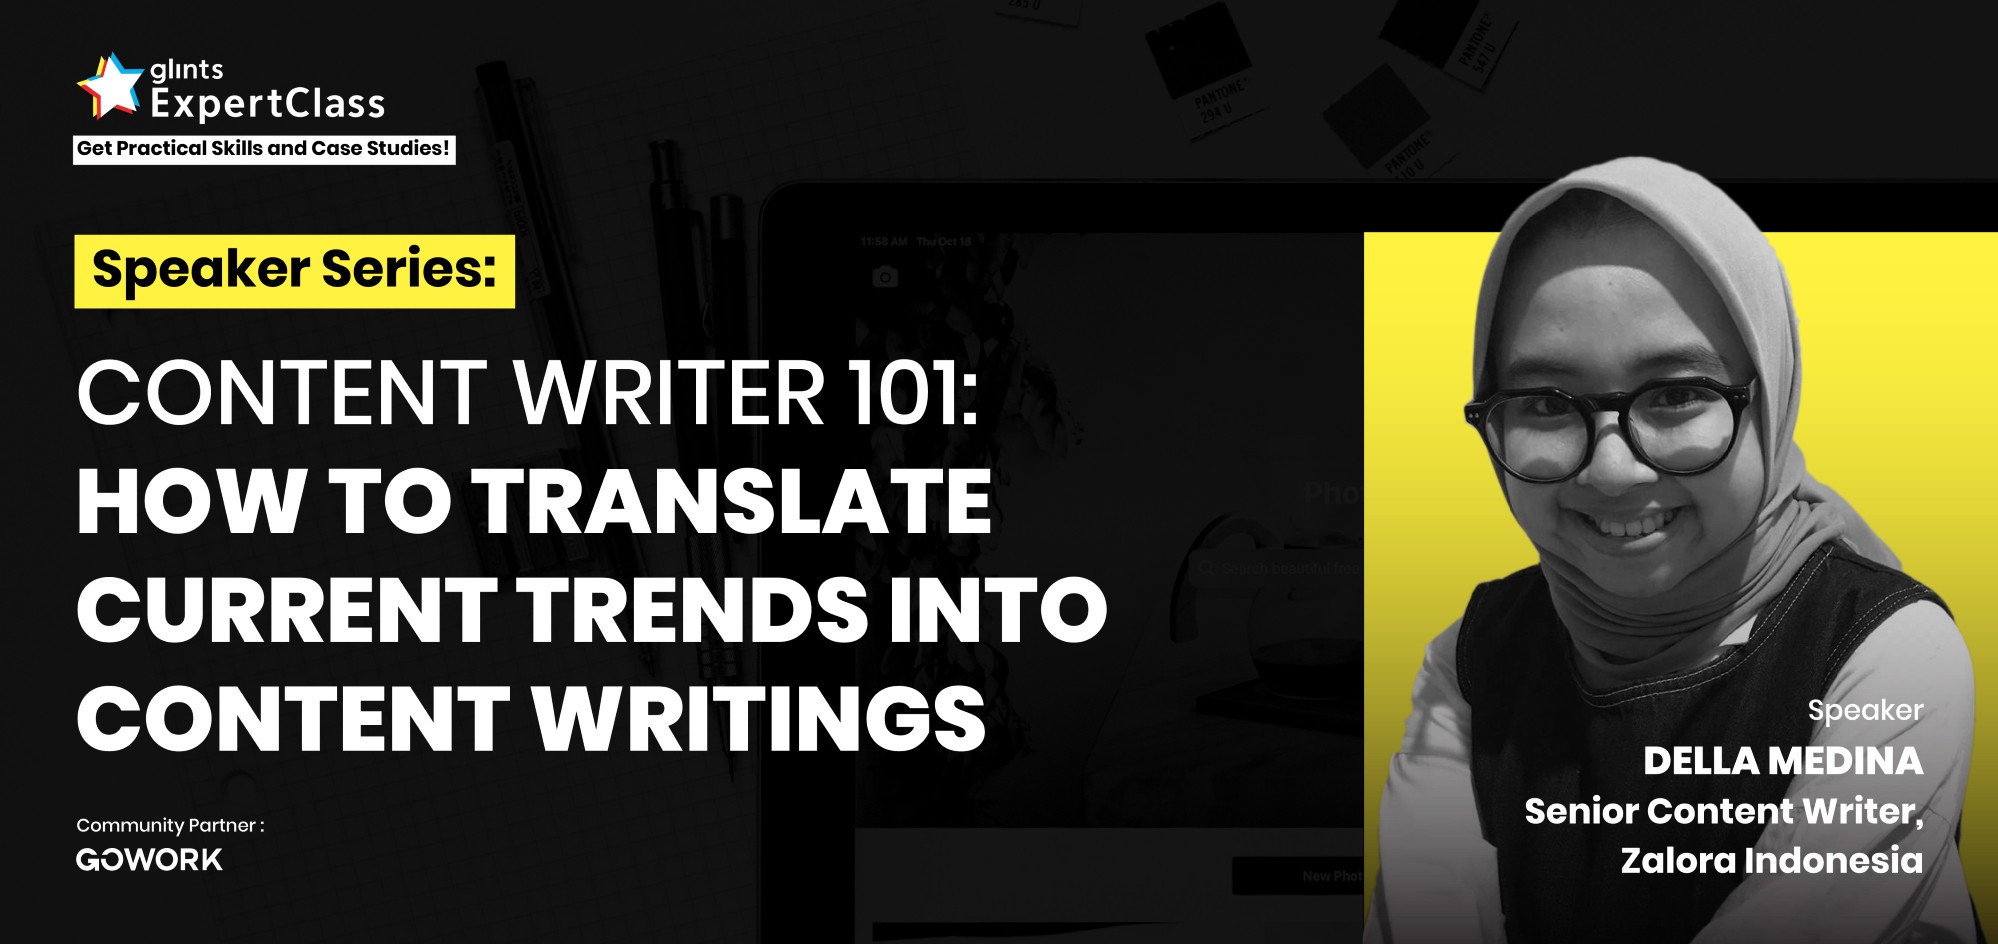 [Online Glints ExpertClass] Content Writer 101: How to Translate Current Trends Into Content Writing